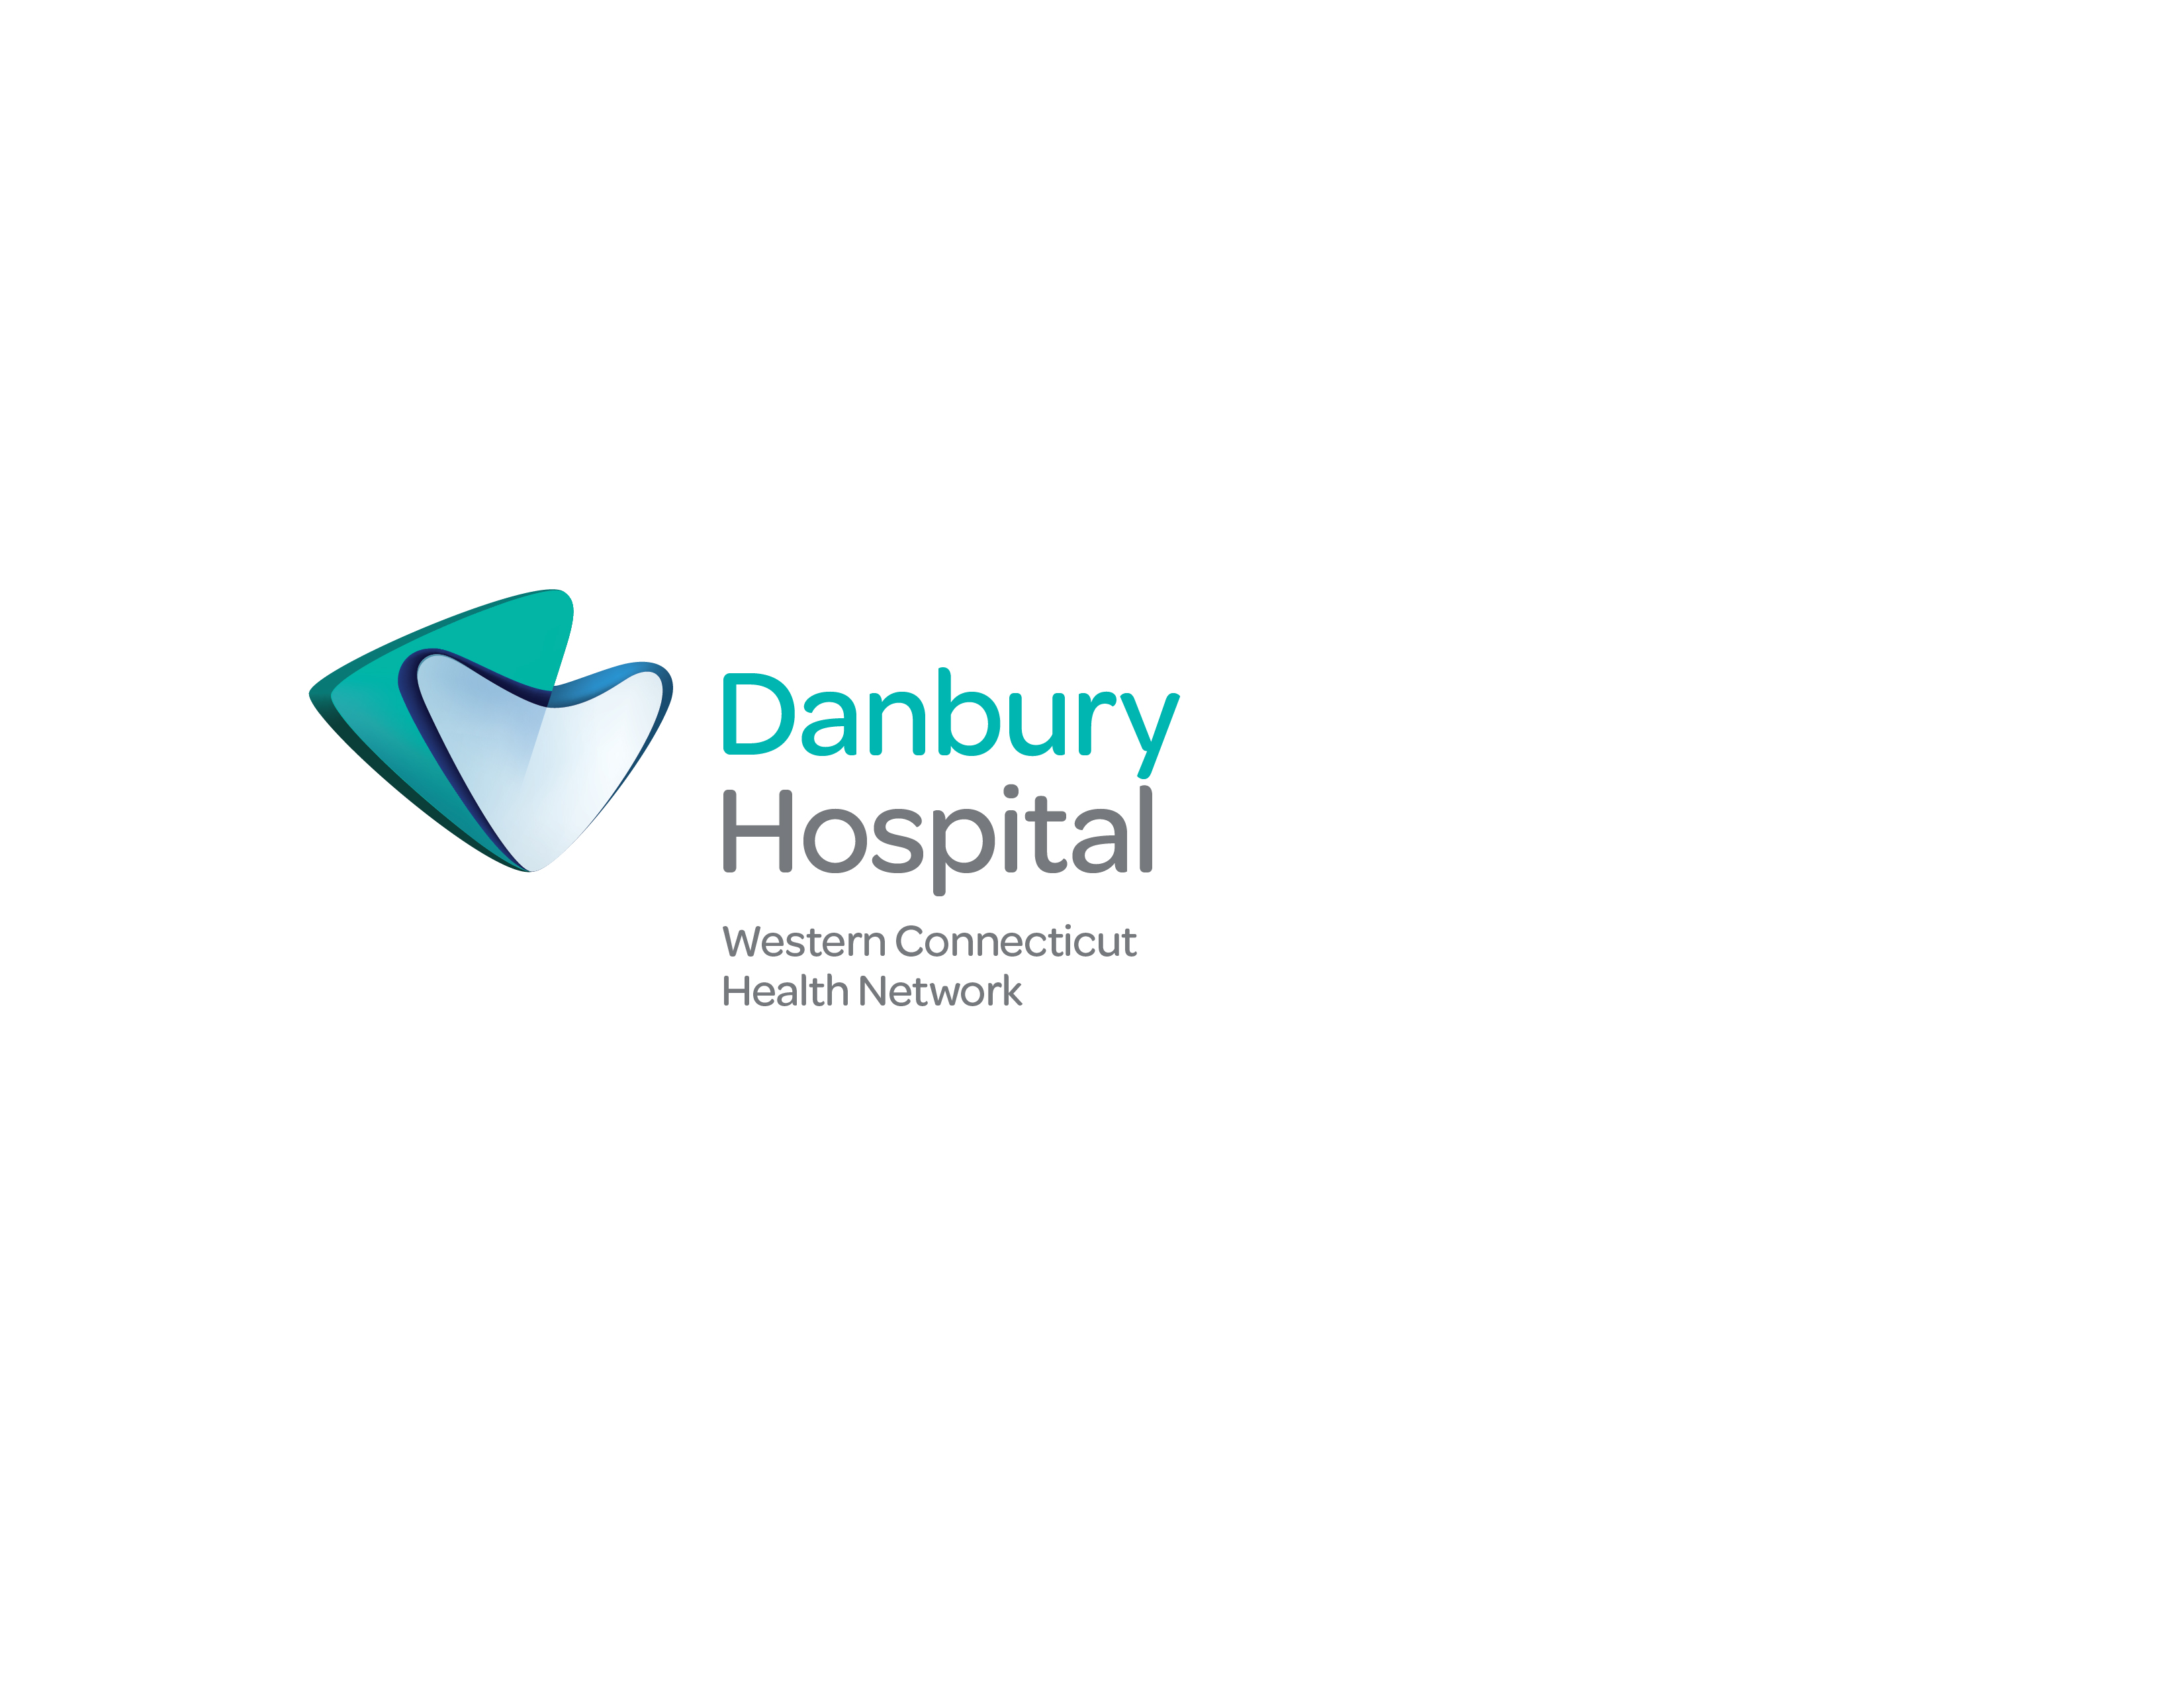 Danbury Hospital, part of the Western Connecticut Health Network